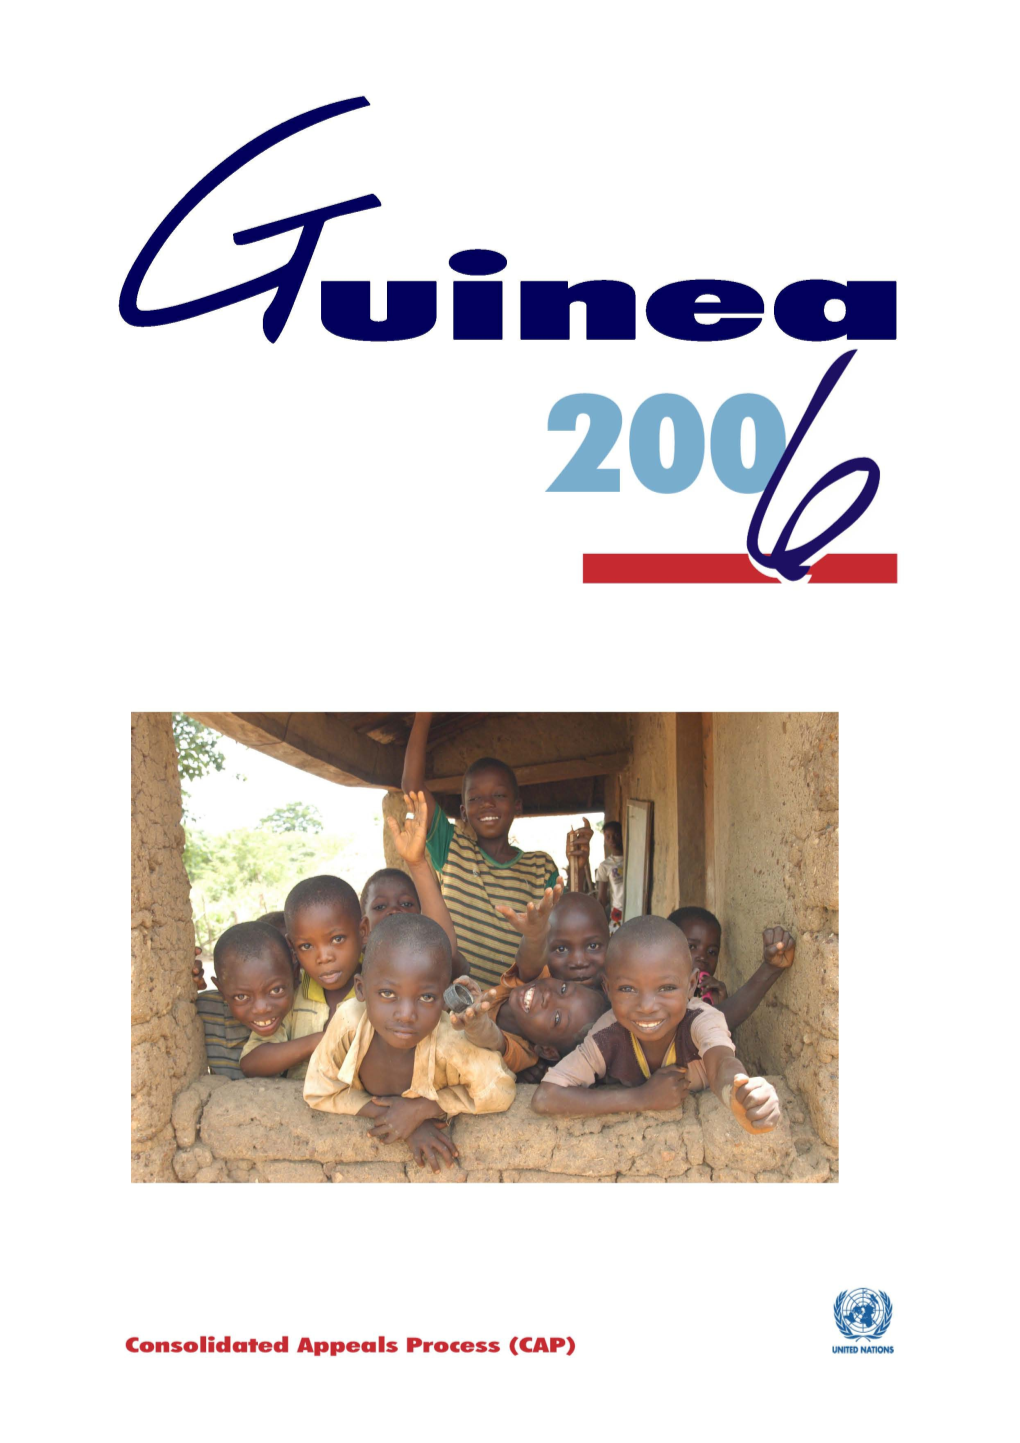 Consolidated Appeal for Guinea 2006 (Word)